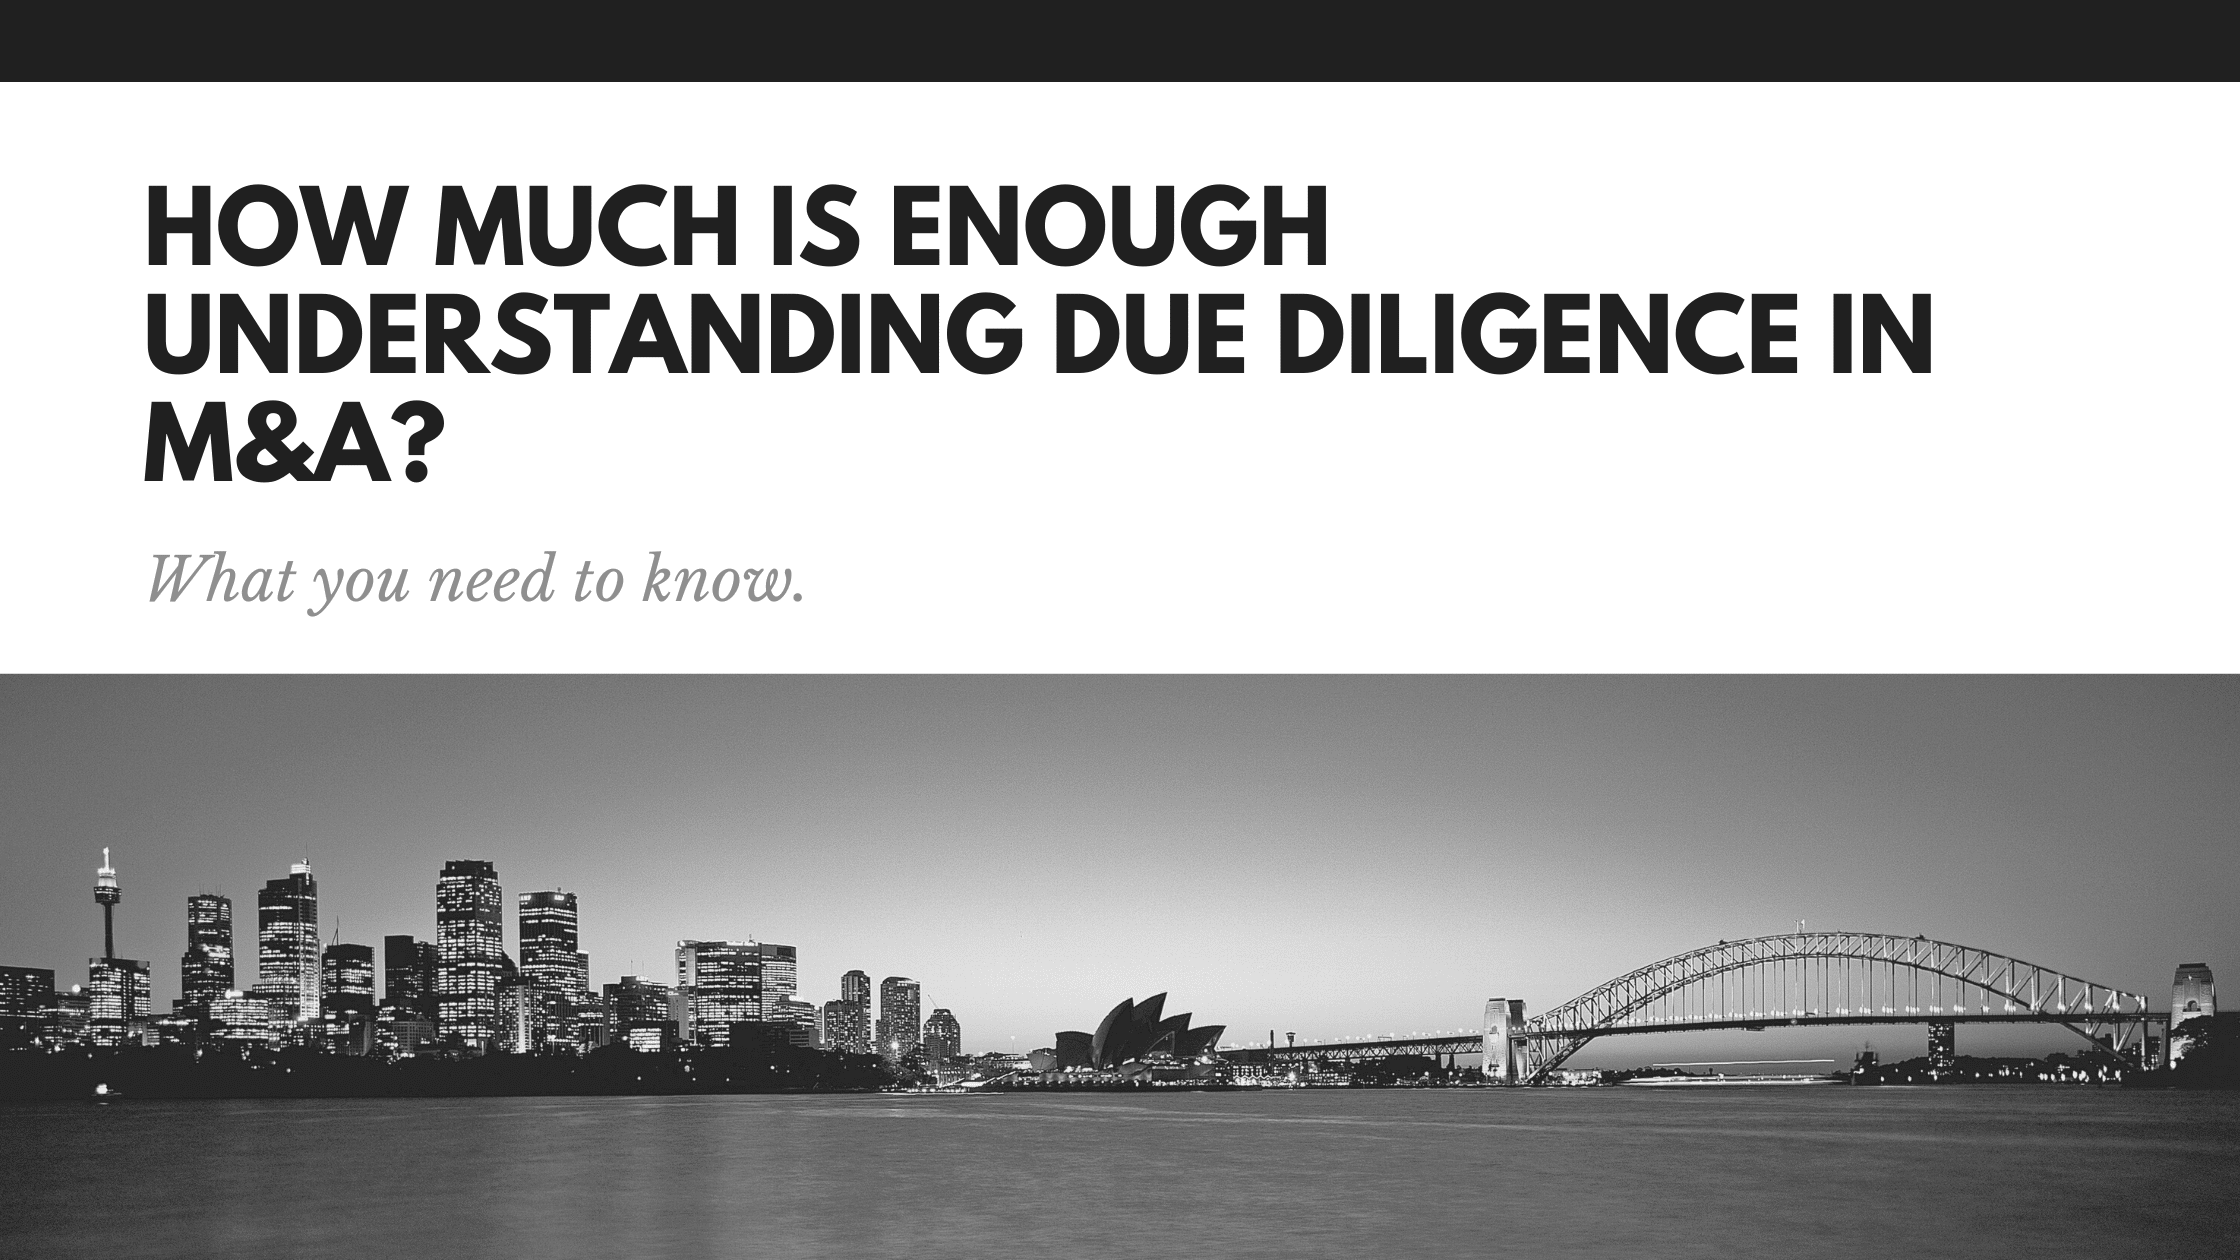 How Much is Enough Understanding Due Diligence in MA